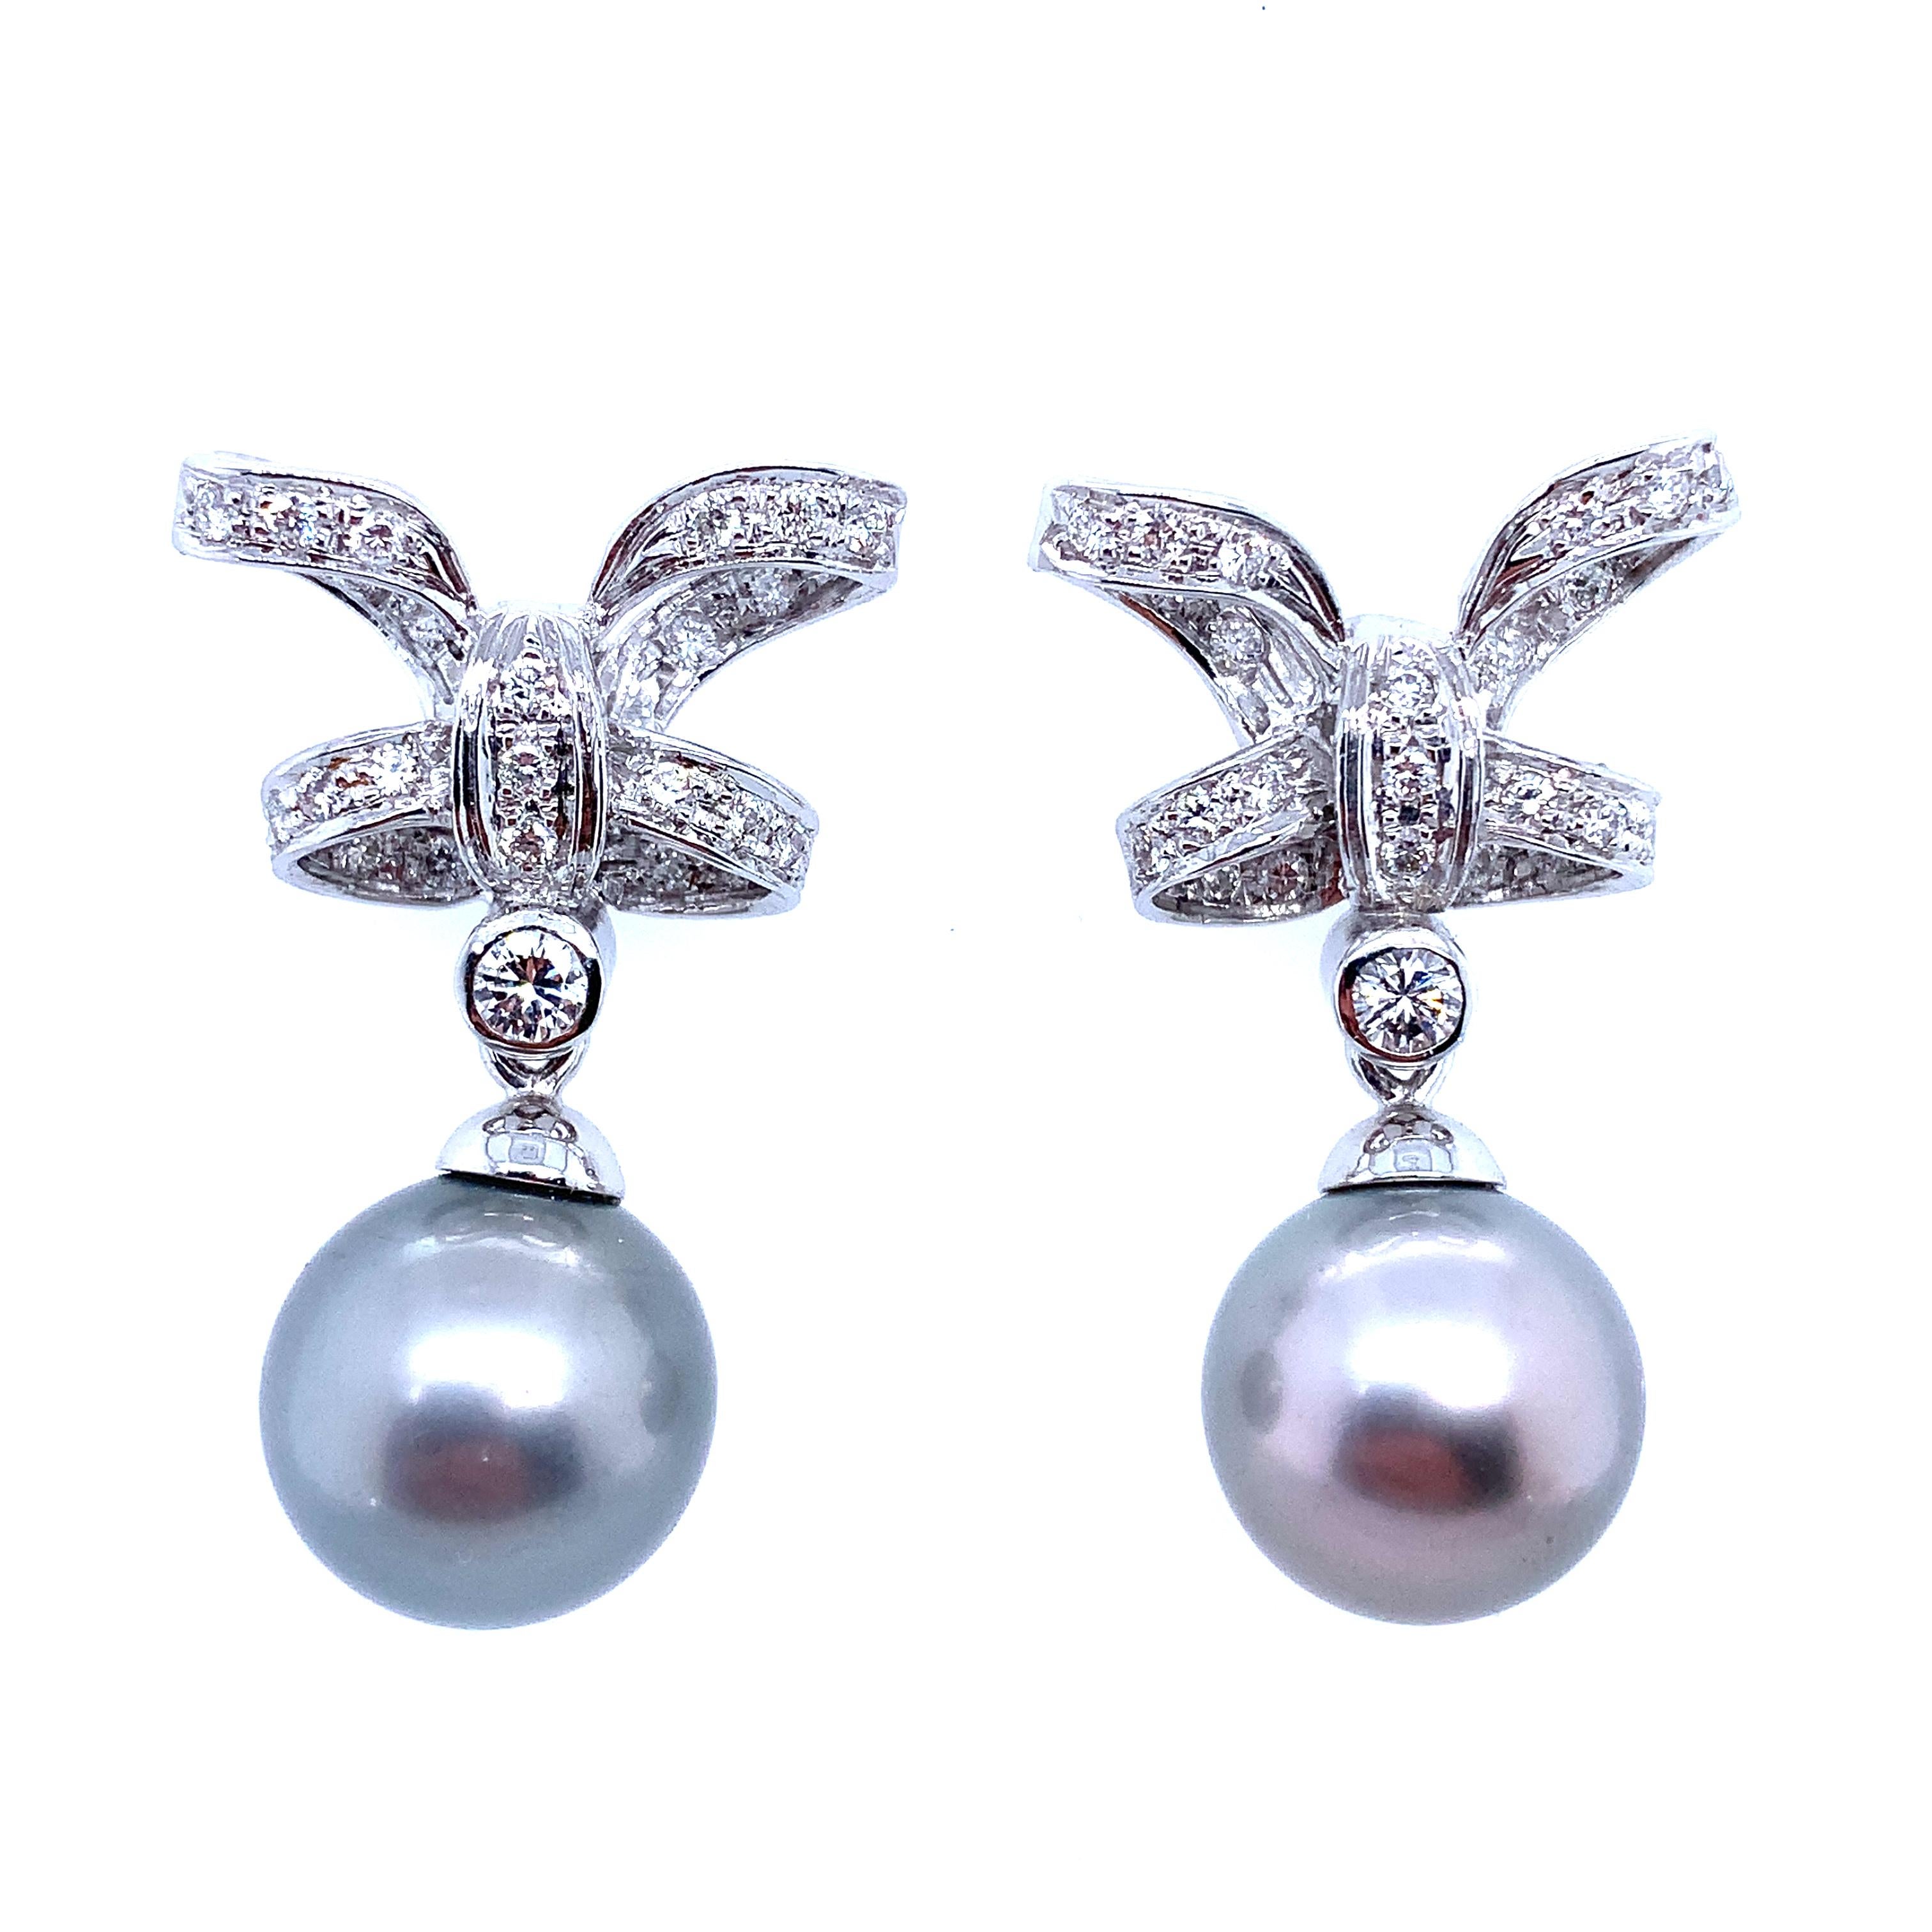 Gorgeous Tahitian platinum grey pearl and diamonds drop earrings in 18k white gold.
Each set with a grey cultured pearl drop measuring approximately 35mm length, upper width of the bow tie approximately 22mm with the depth 8mm suspended from round